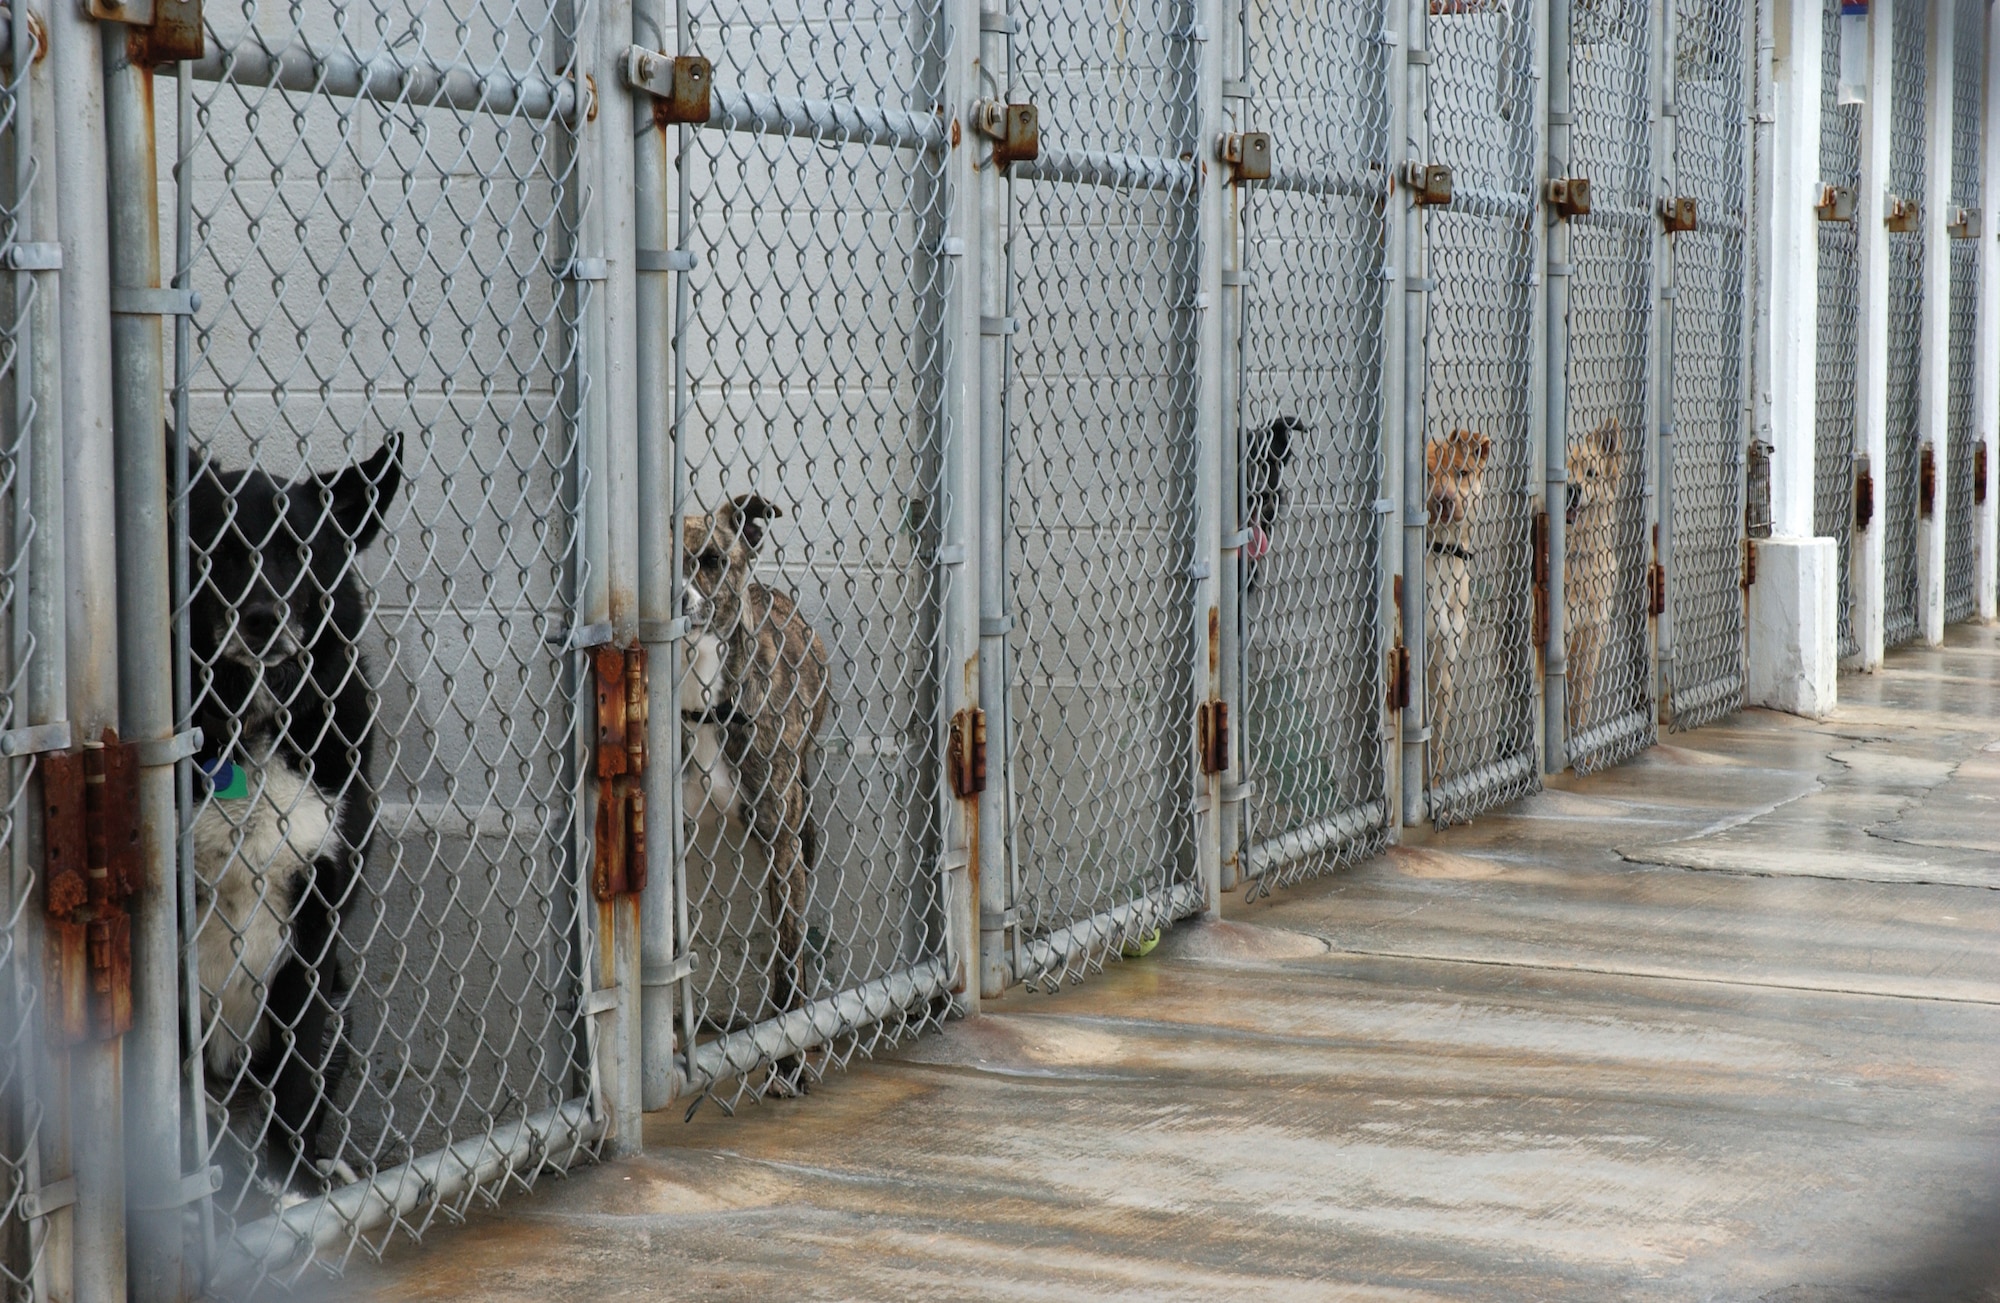 Stray dogs and unwanted pets are being kept at the 18th Services Squadron’s Karing Kennels. Packs of strays have
been seen around the base and are the source of recent attacks on family pets and other community members.
(U.S. Air Force photo/Senior Airman Jeremy McGuffin) 